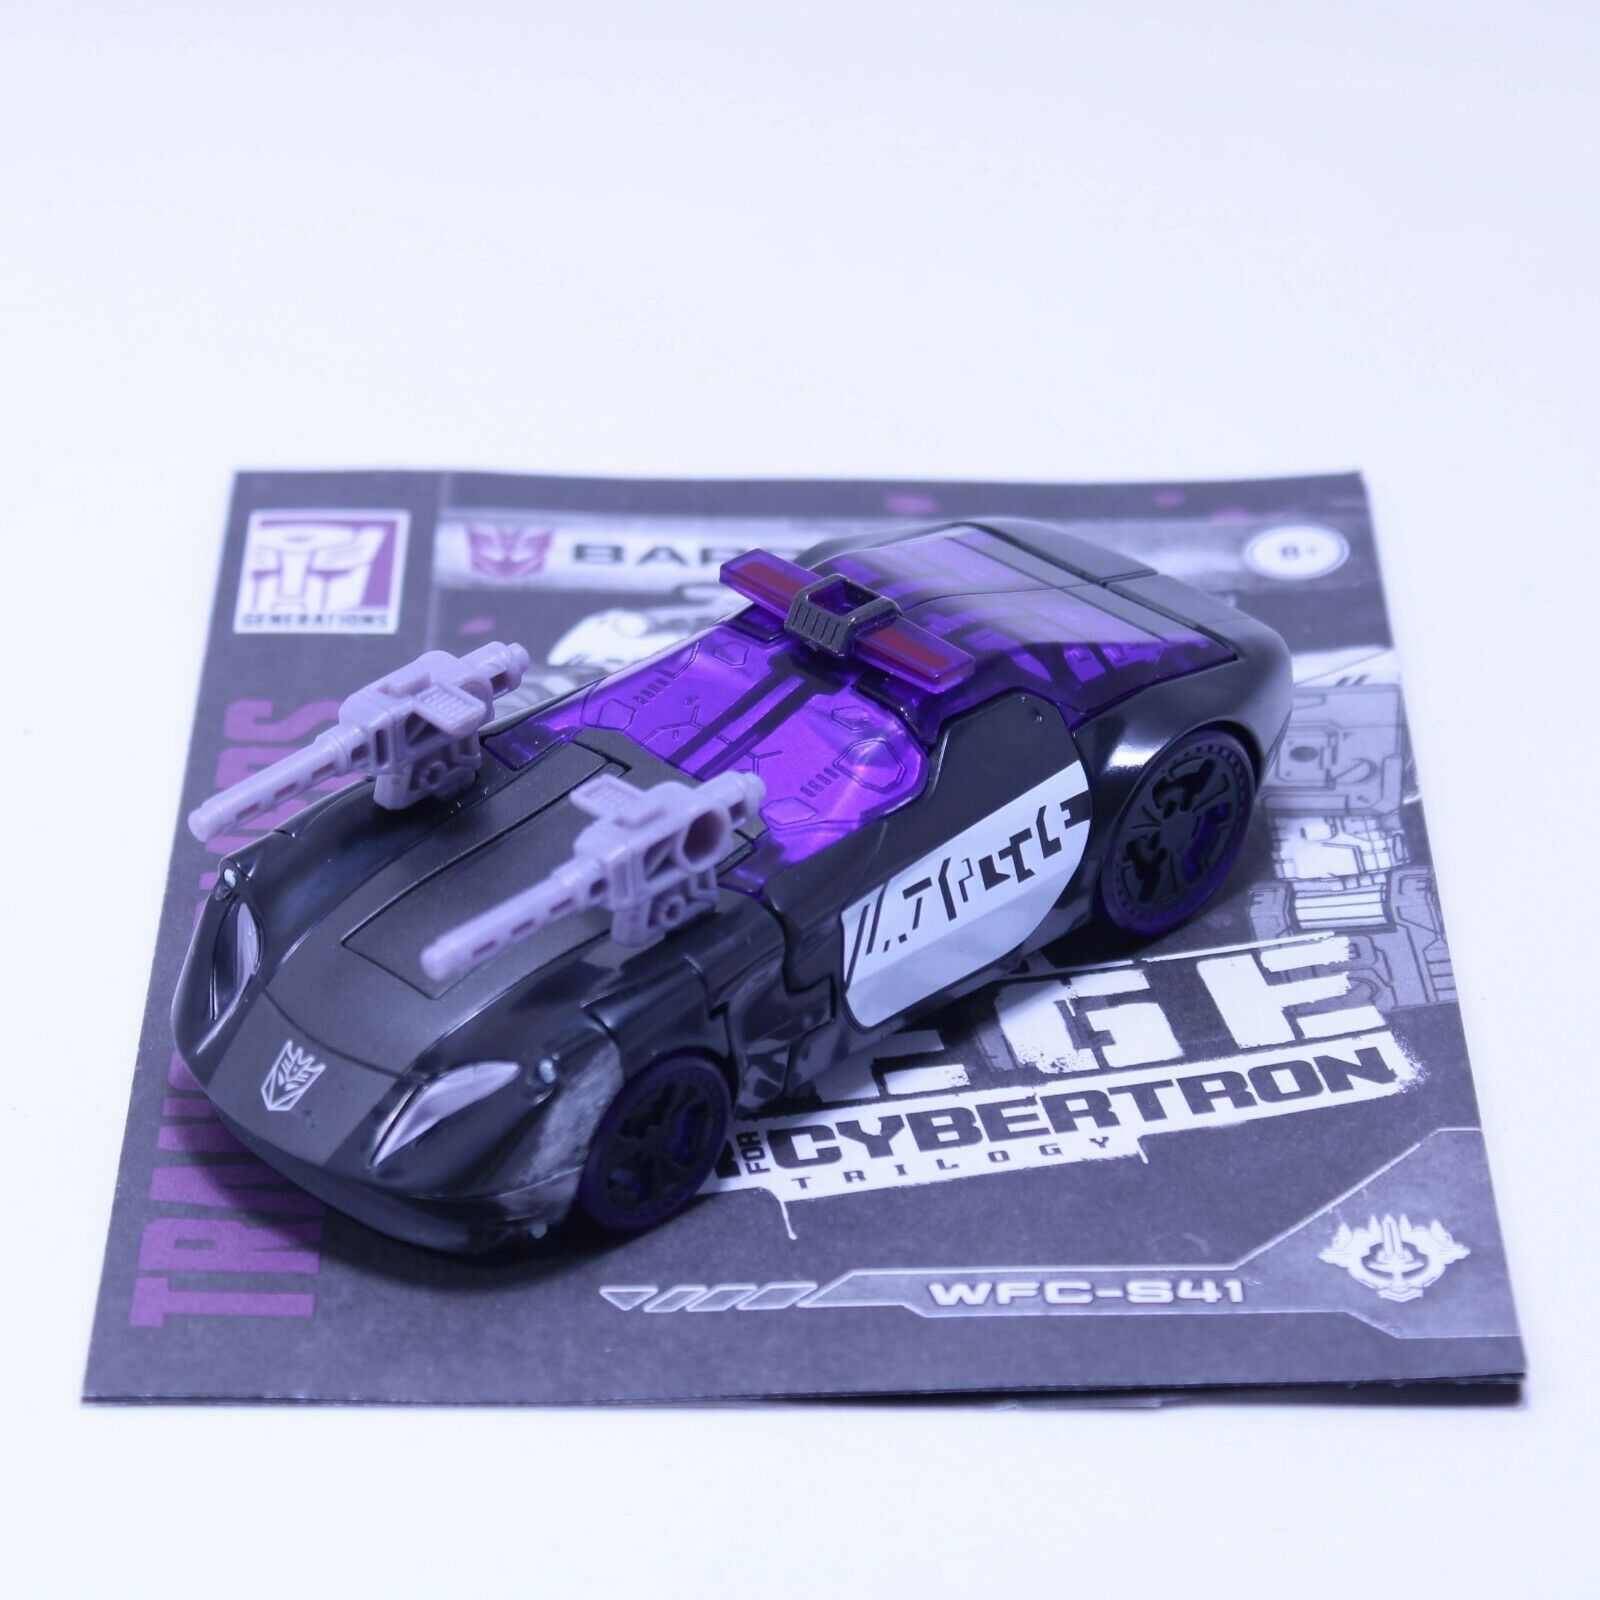 Transformers Siege Barricade - War for Cybertron Action Figure 100% Complete